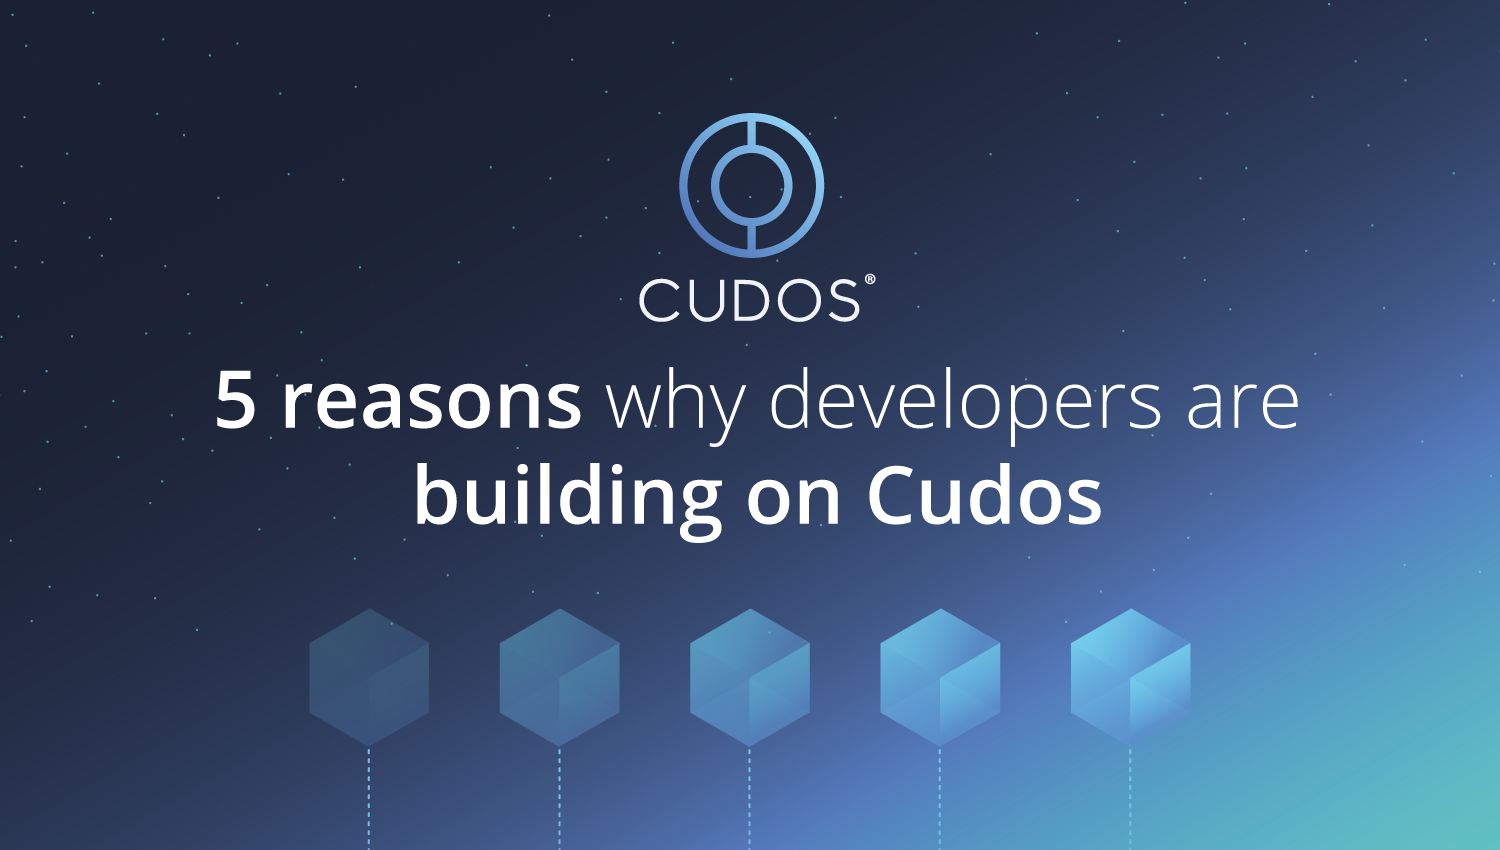 5 reasons why developers are building on Cudos